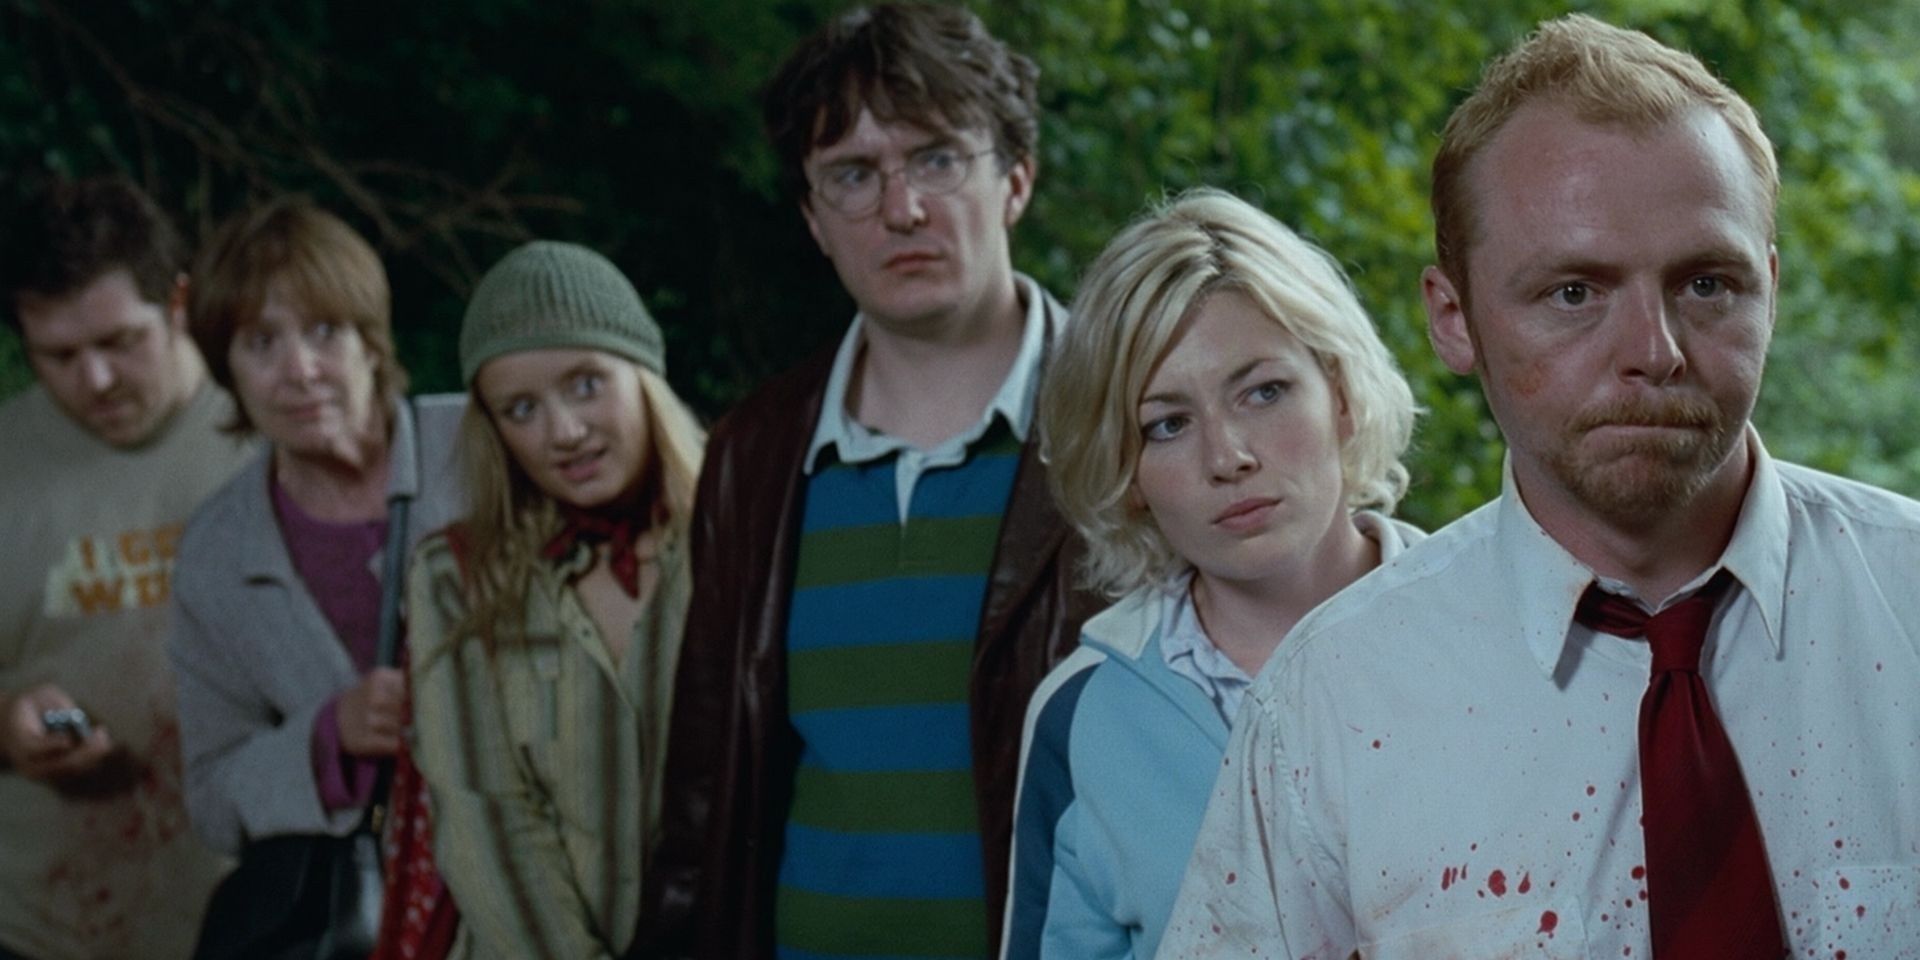 Shaun and the survivors in Shaun of the Dead